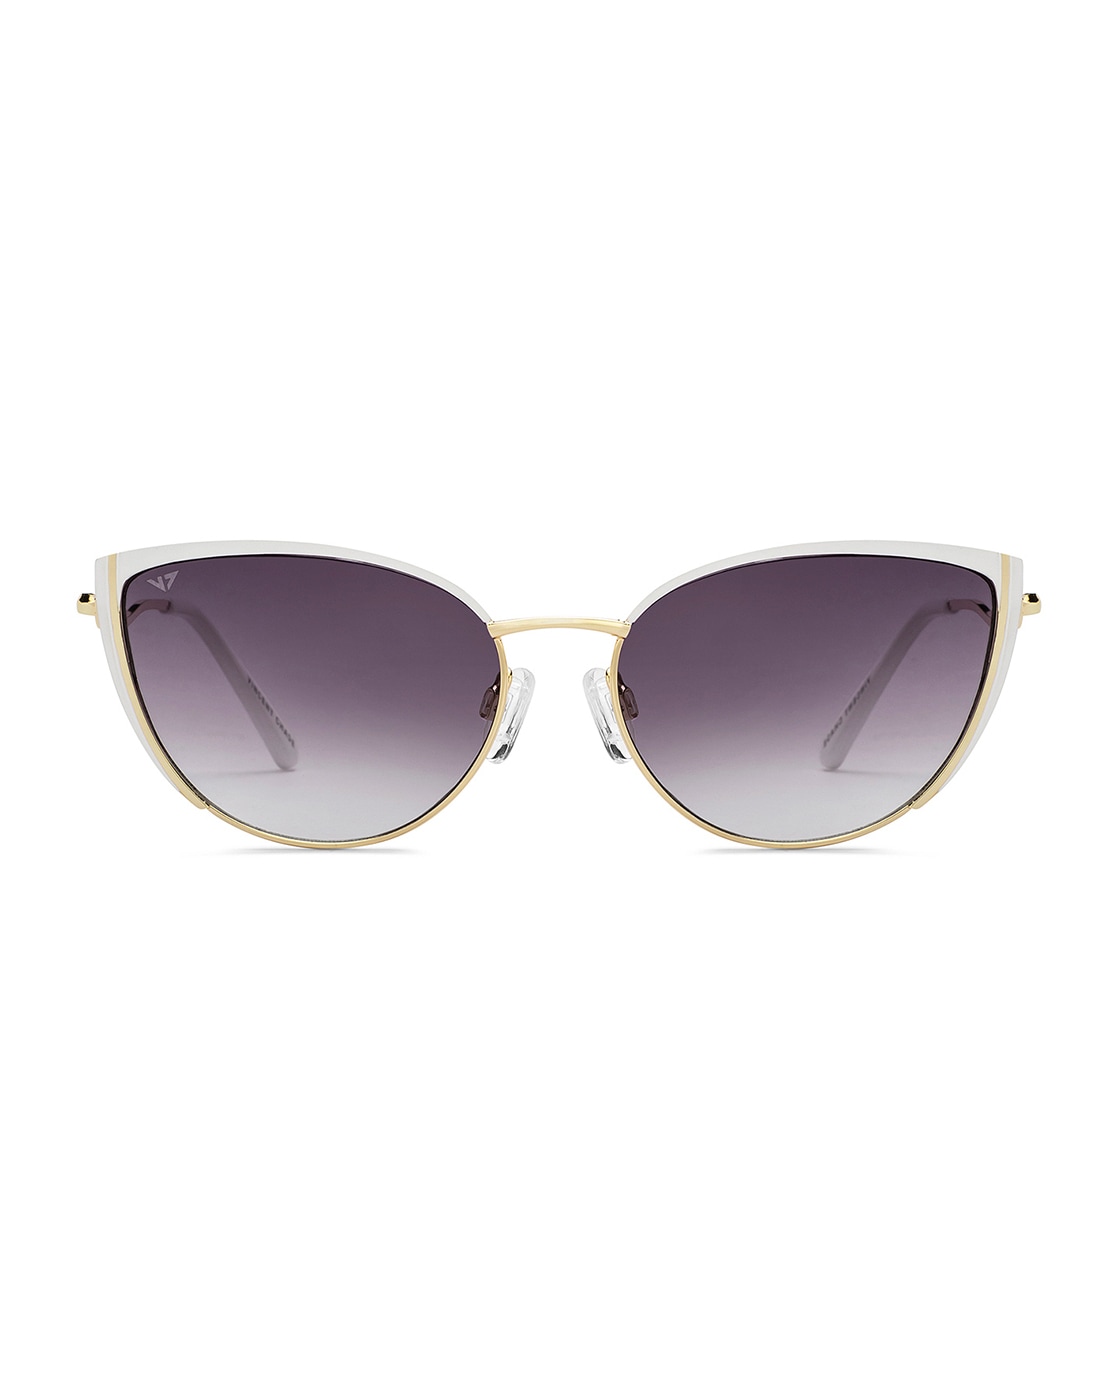 Ray-Ban RB2299 - Cat Eye Transparent Pink Frame Sunglasses For Women |  Eyebuydirect